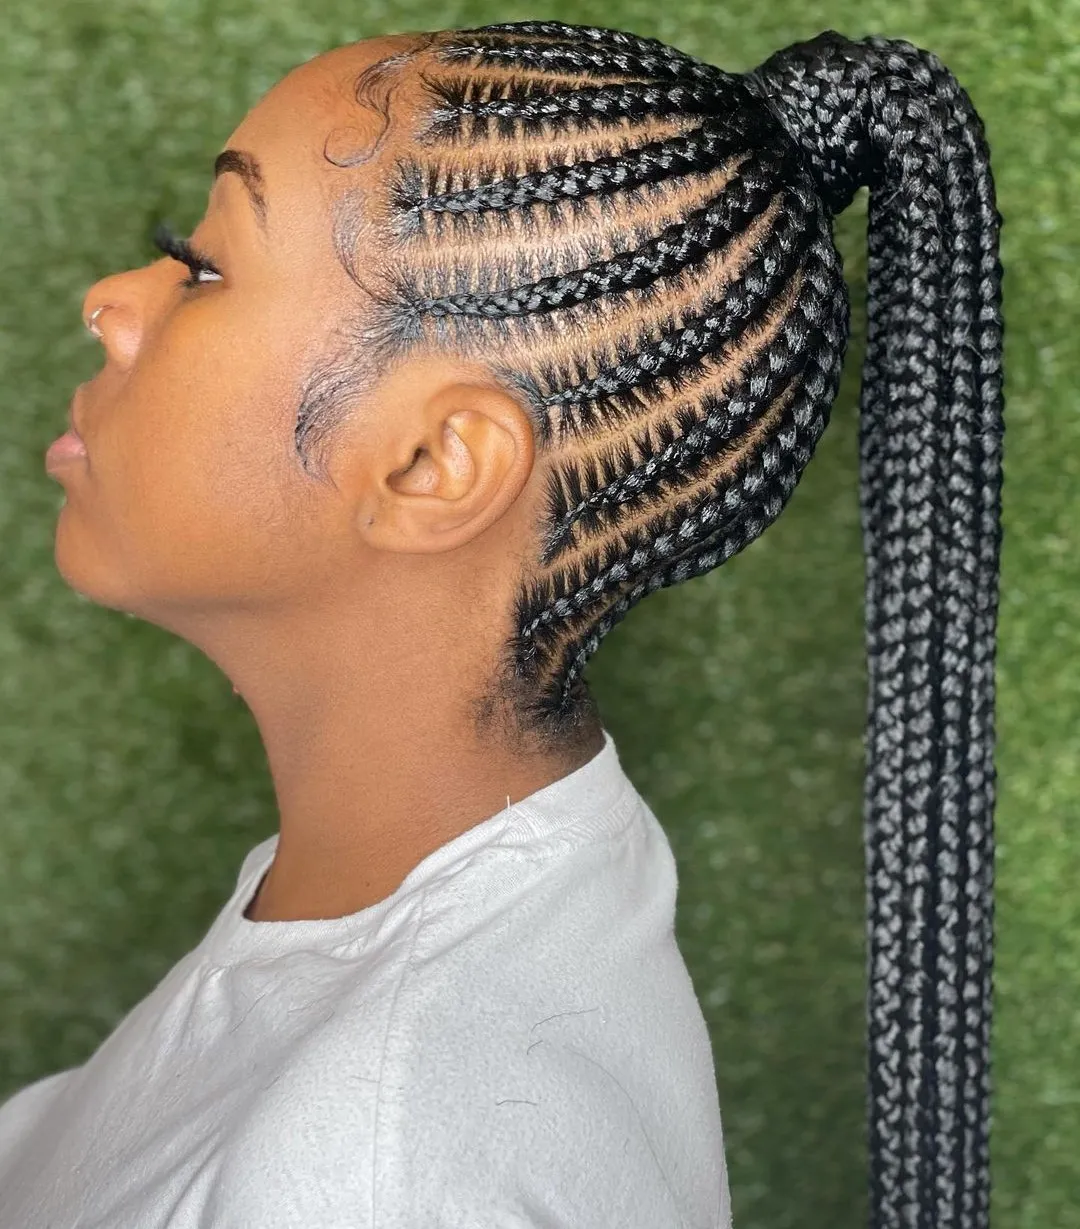 Top 10 African Hairstyles For Women - mclemore